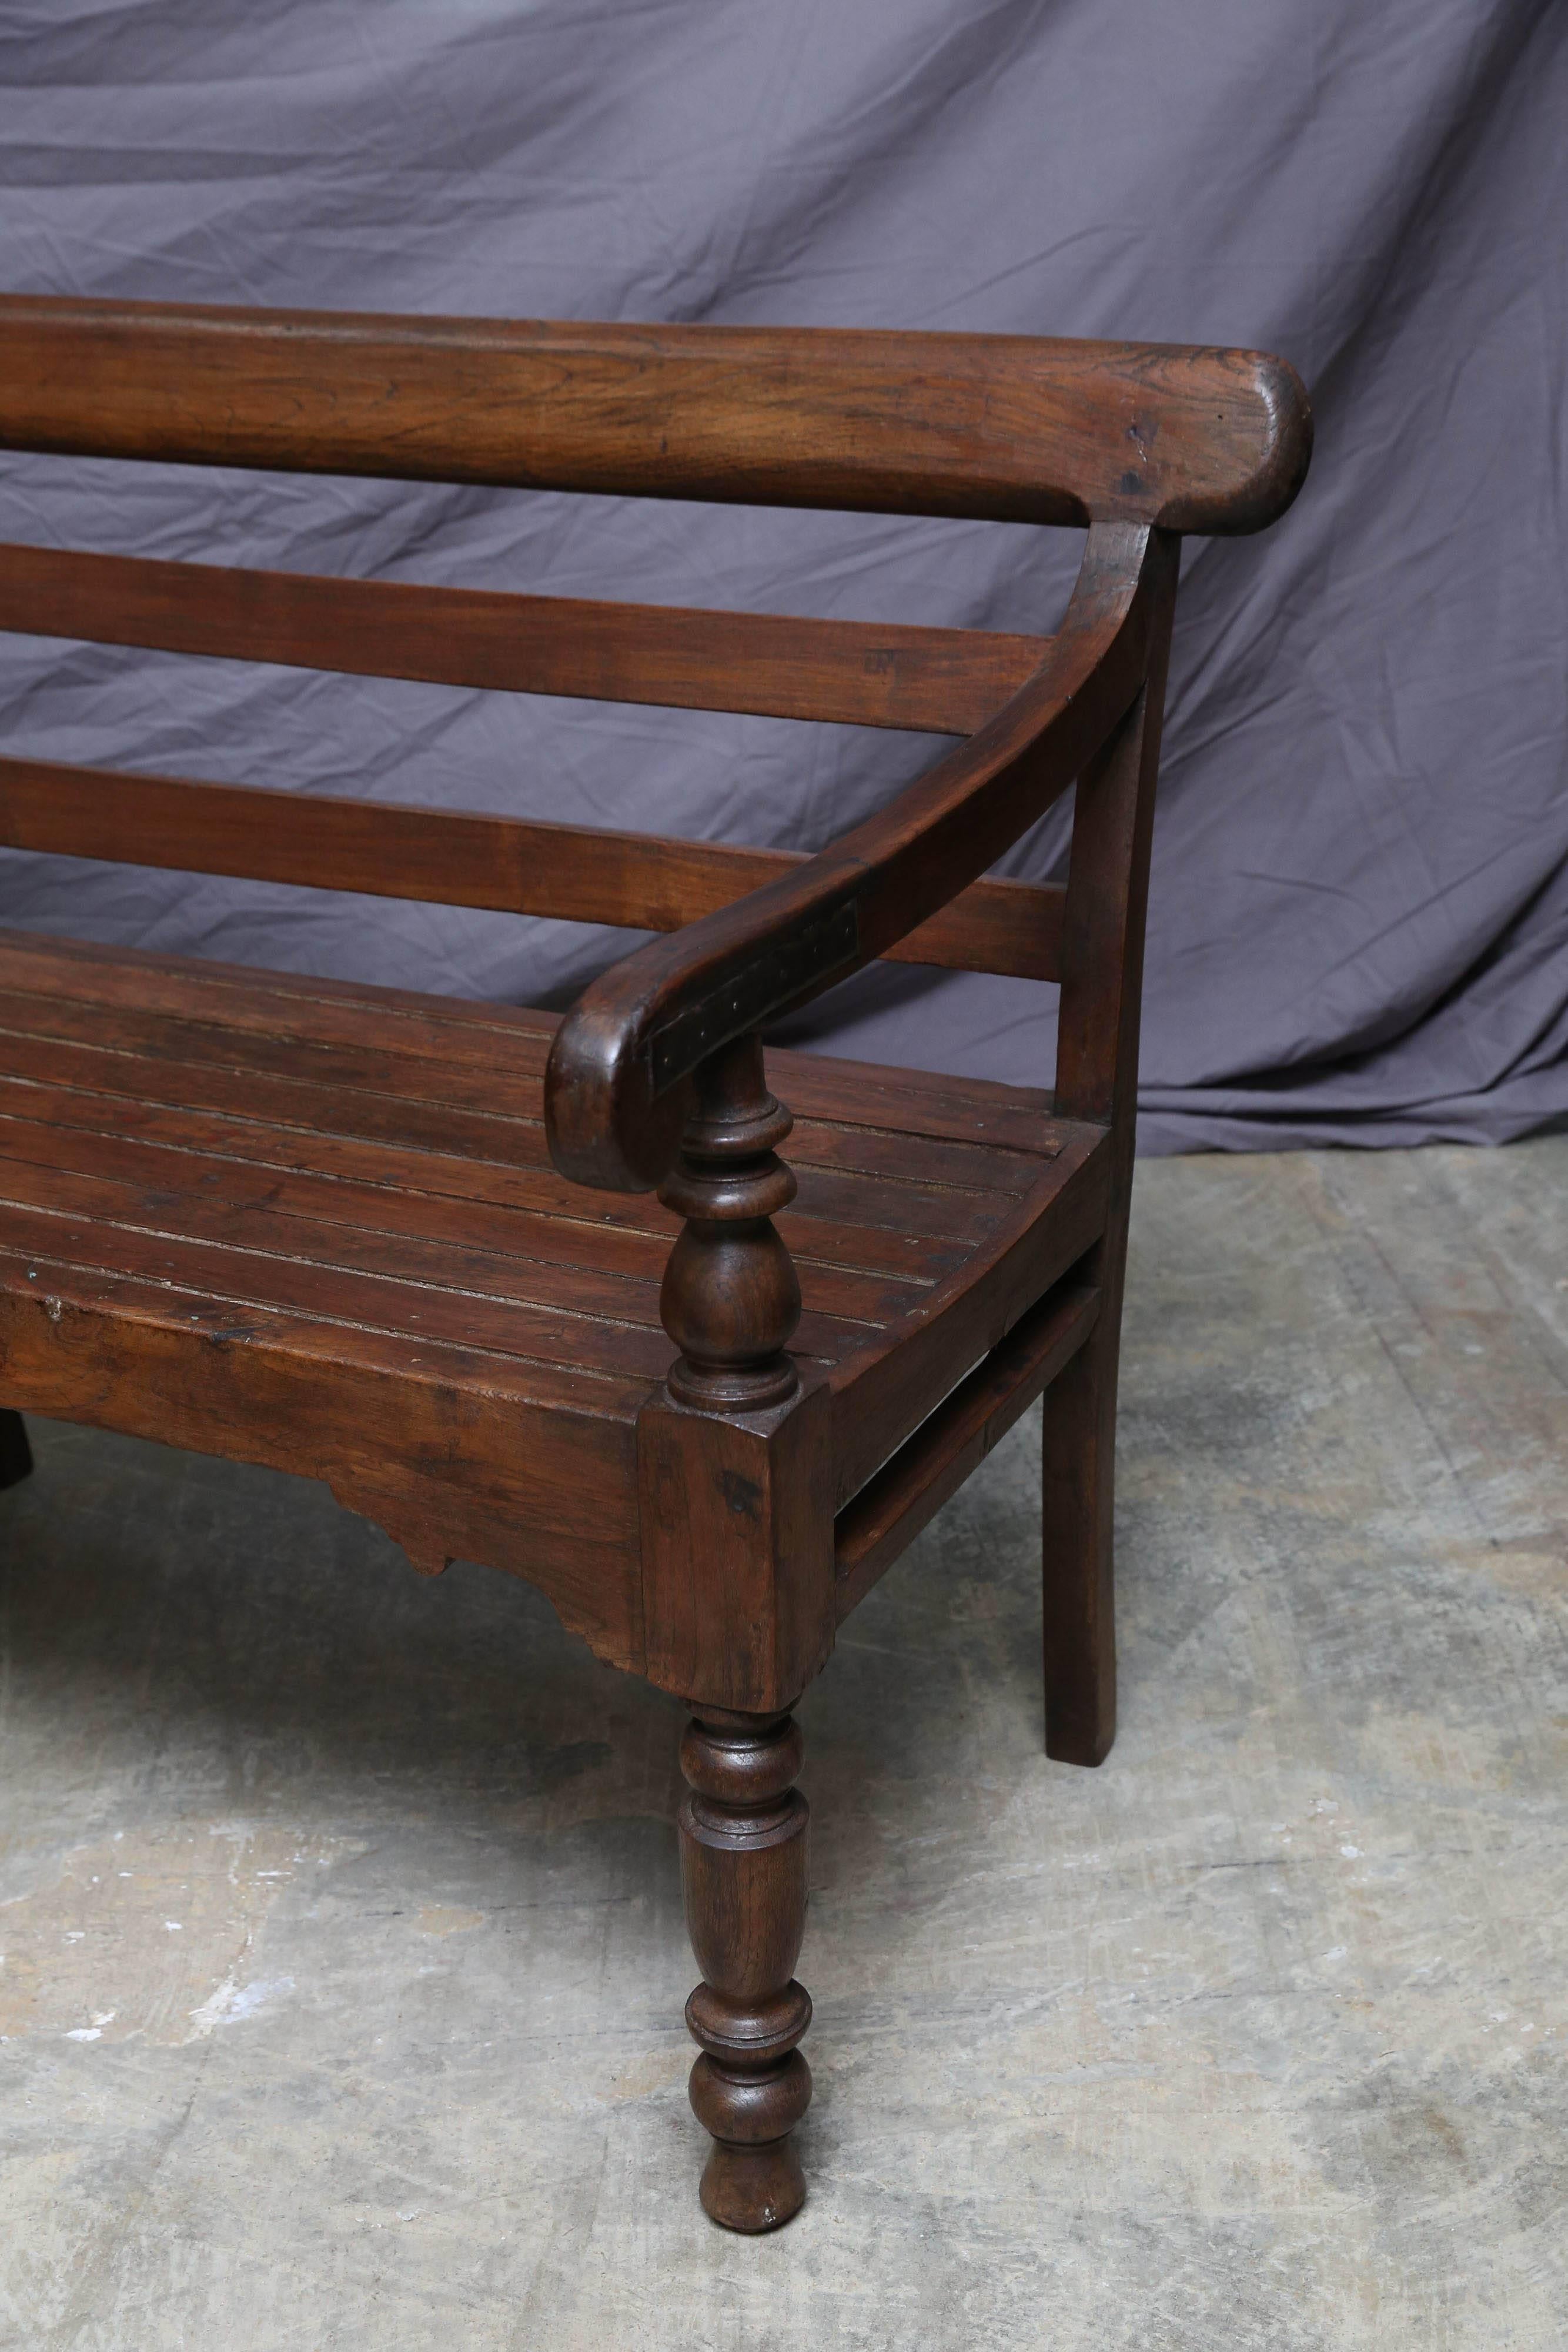 Indian Late 19th Century Solid Teak Wood Bench from a Colonial Tea Plantation